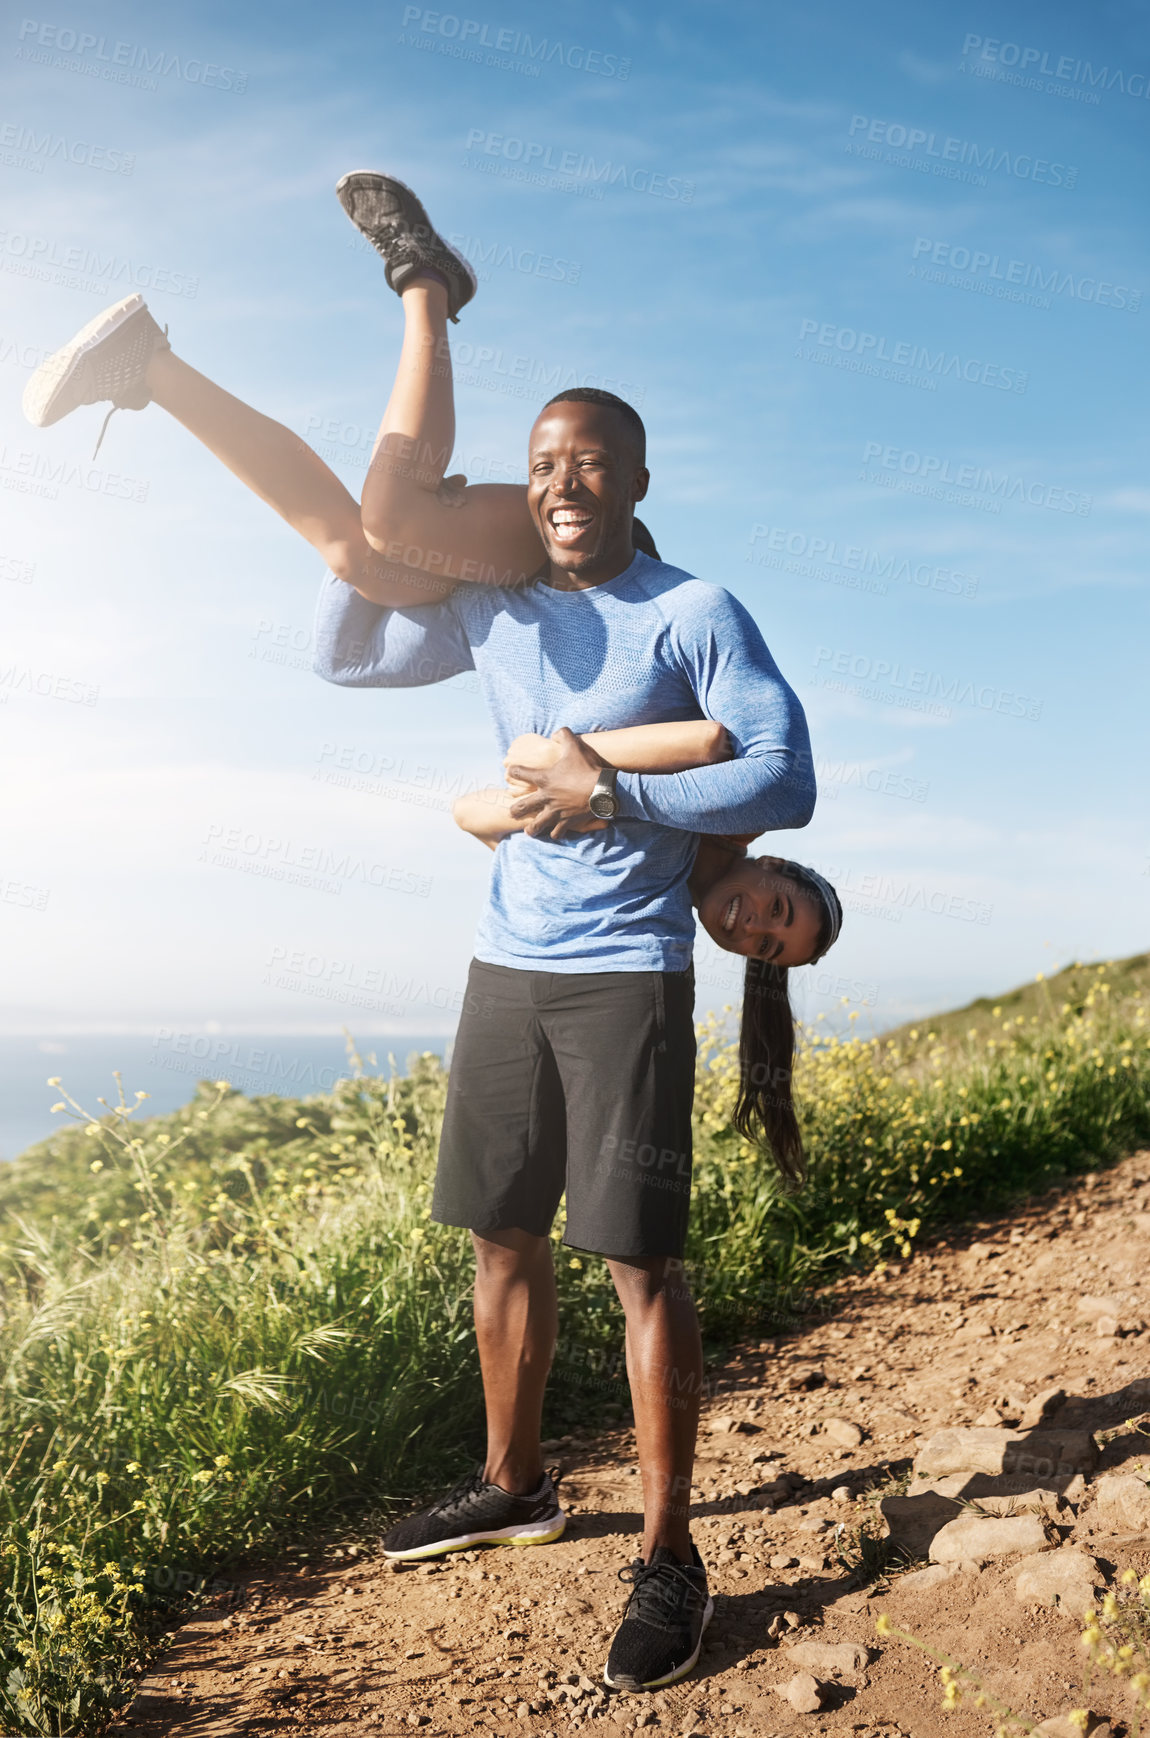 Buy stock photo Shot of a muscular man carrying his girlfriend over his shoulders